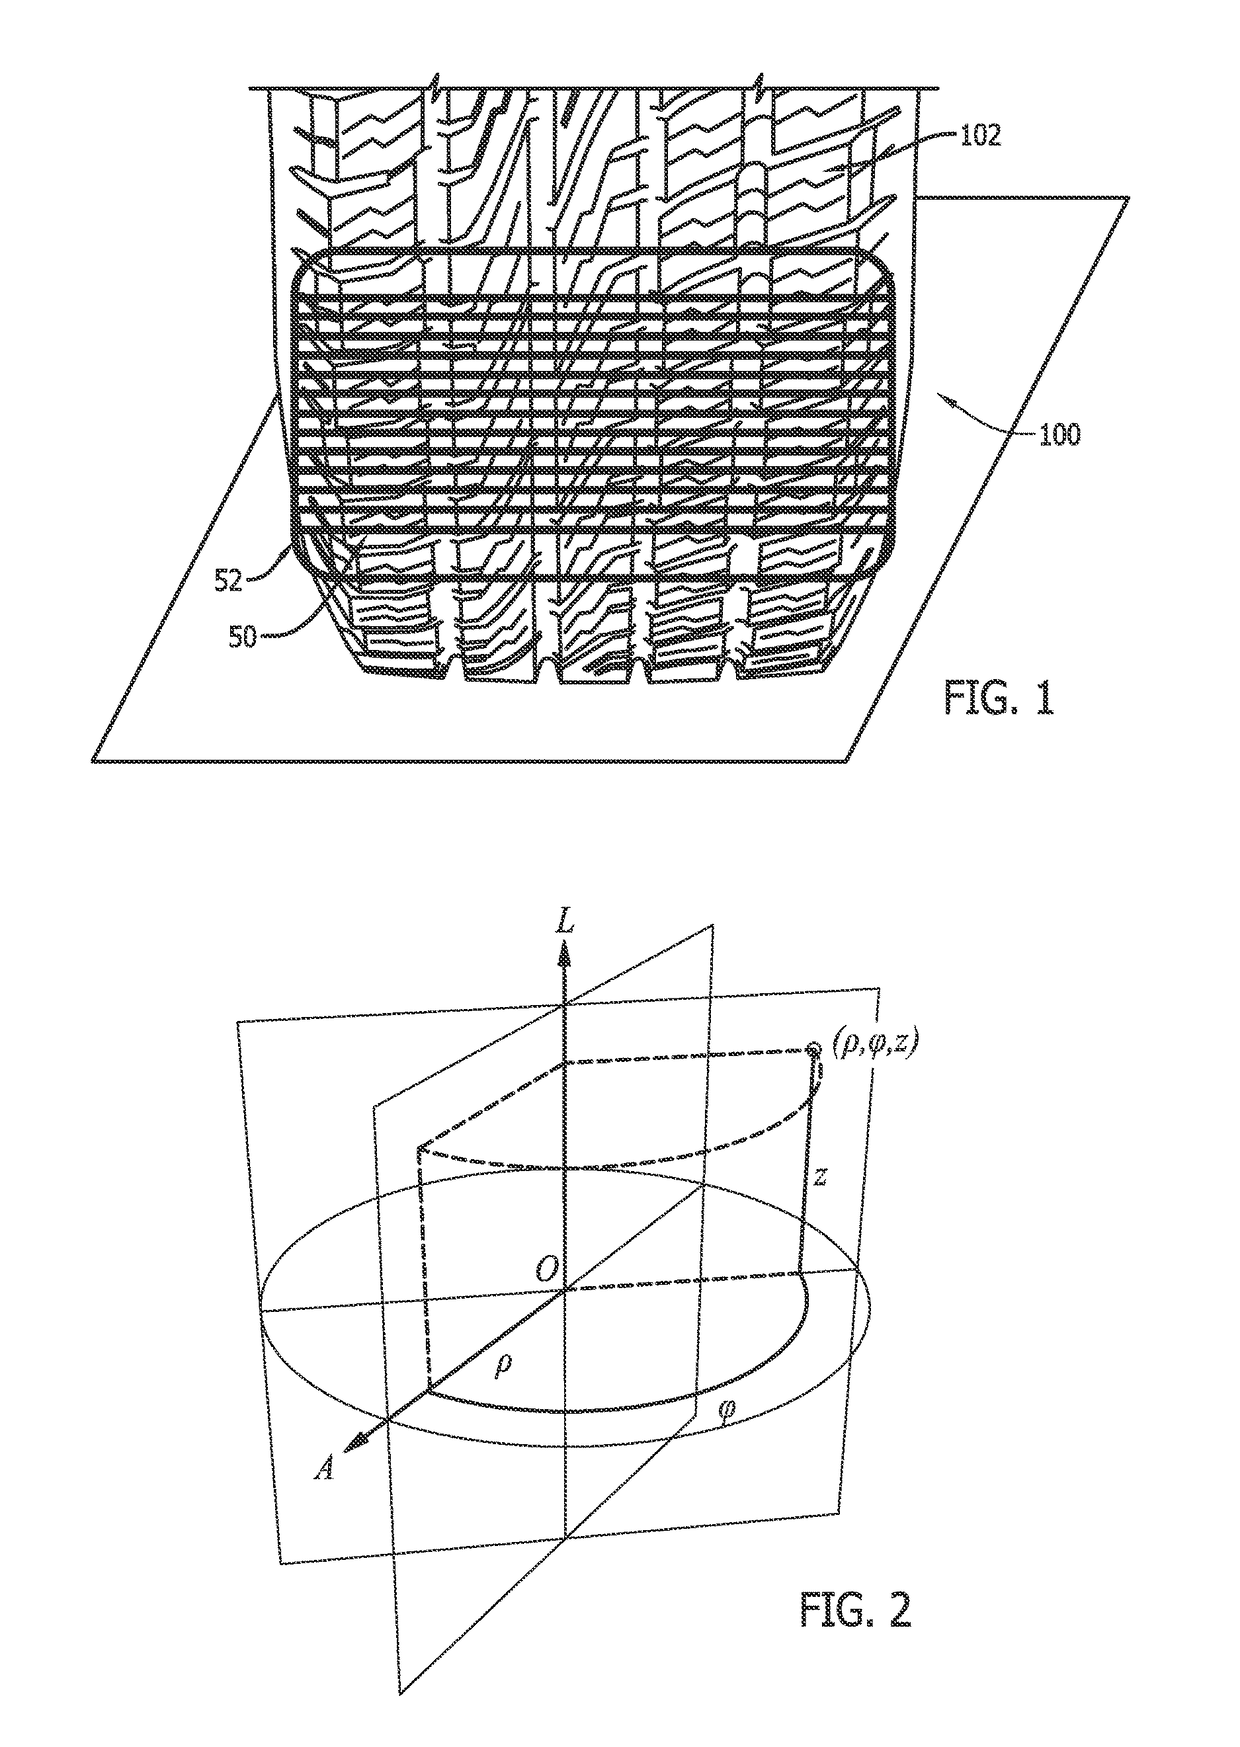 Method for tire tread depth modeling and image annotation